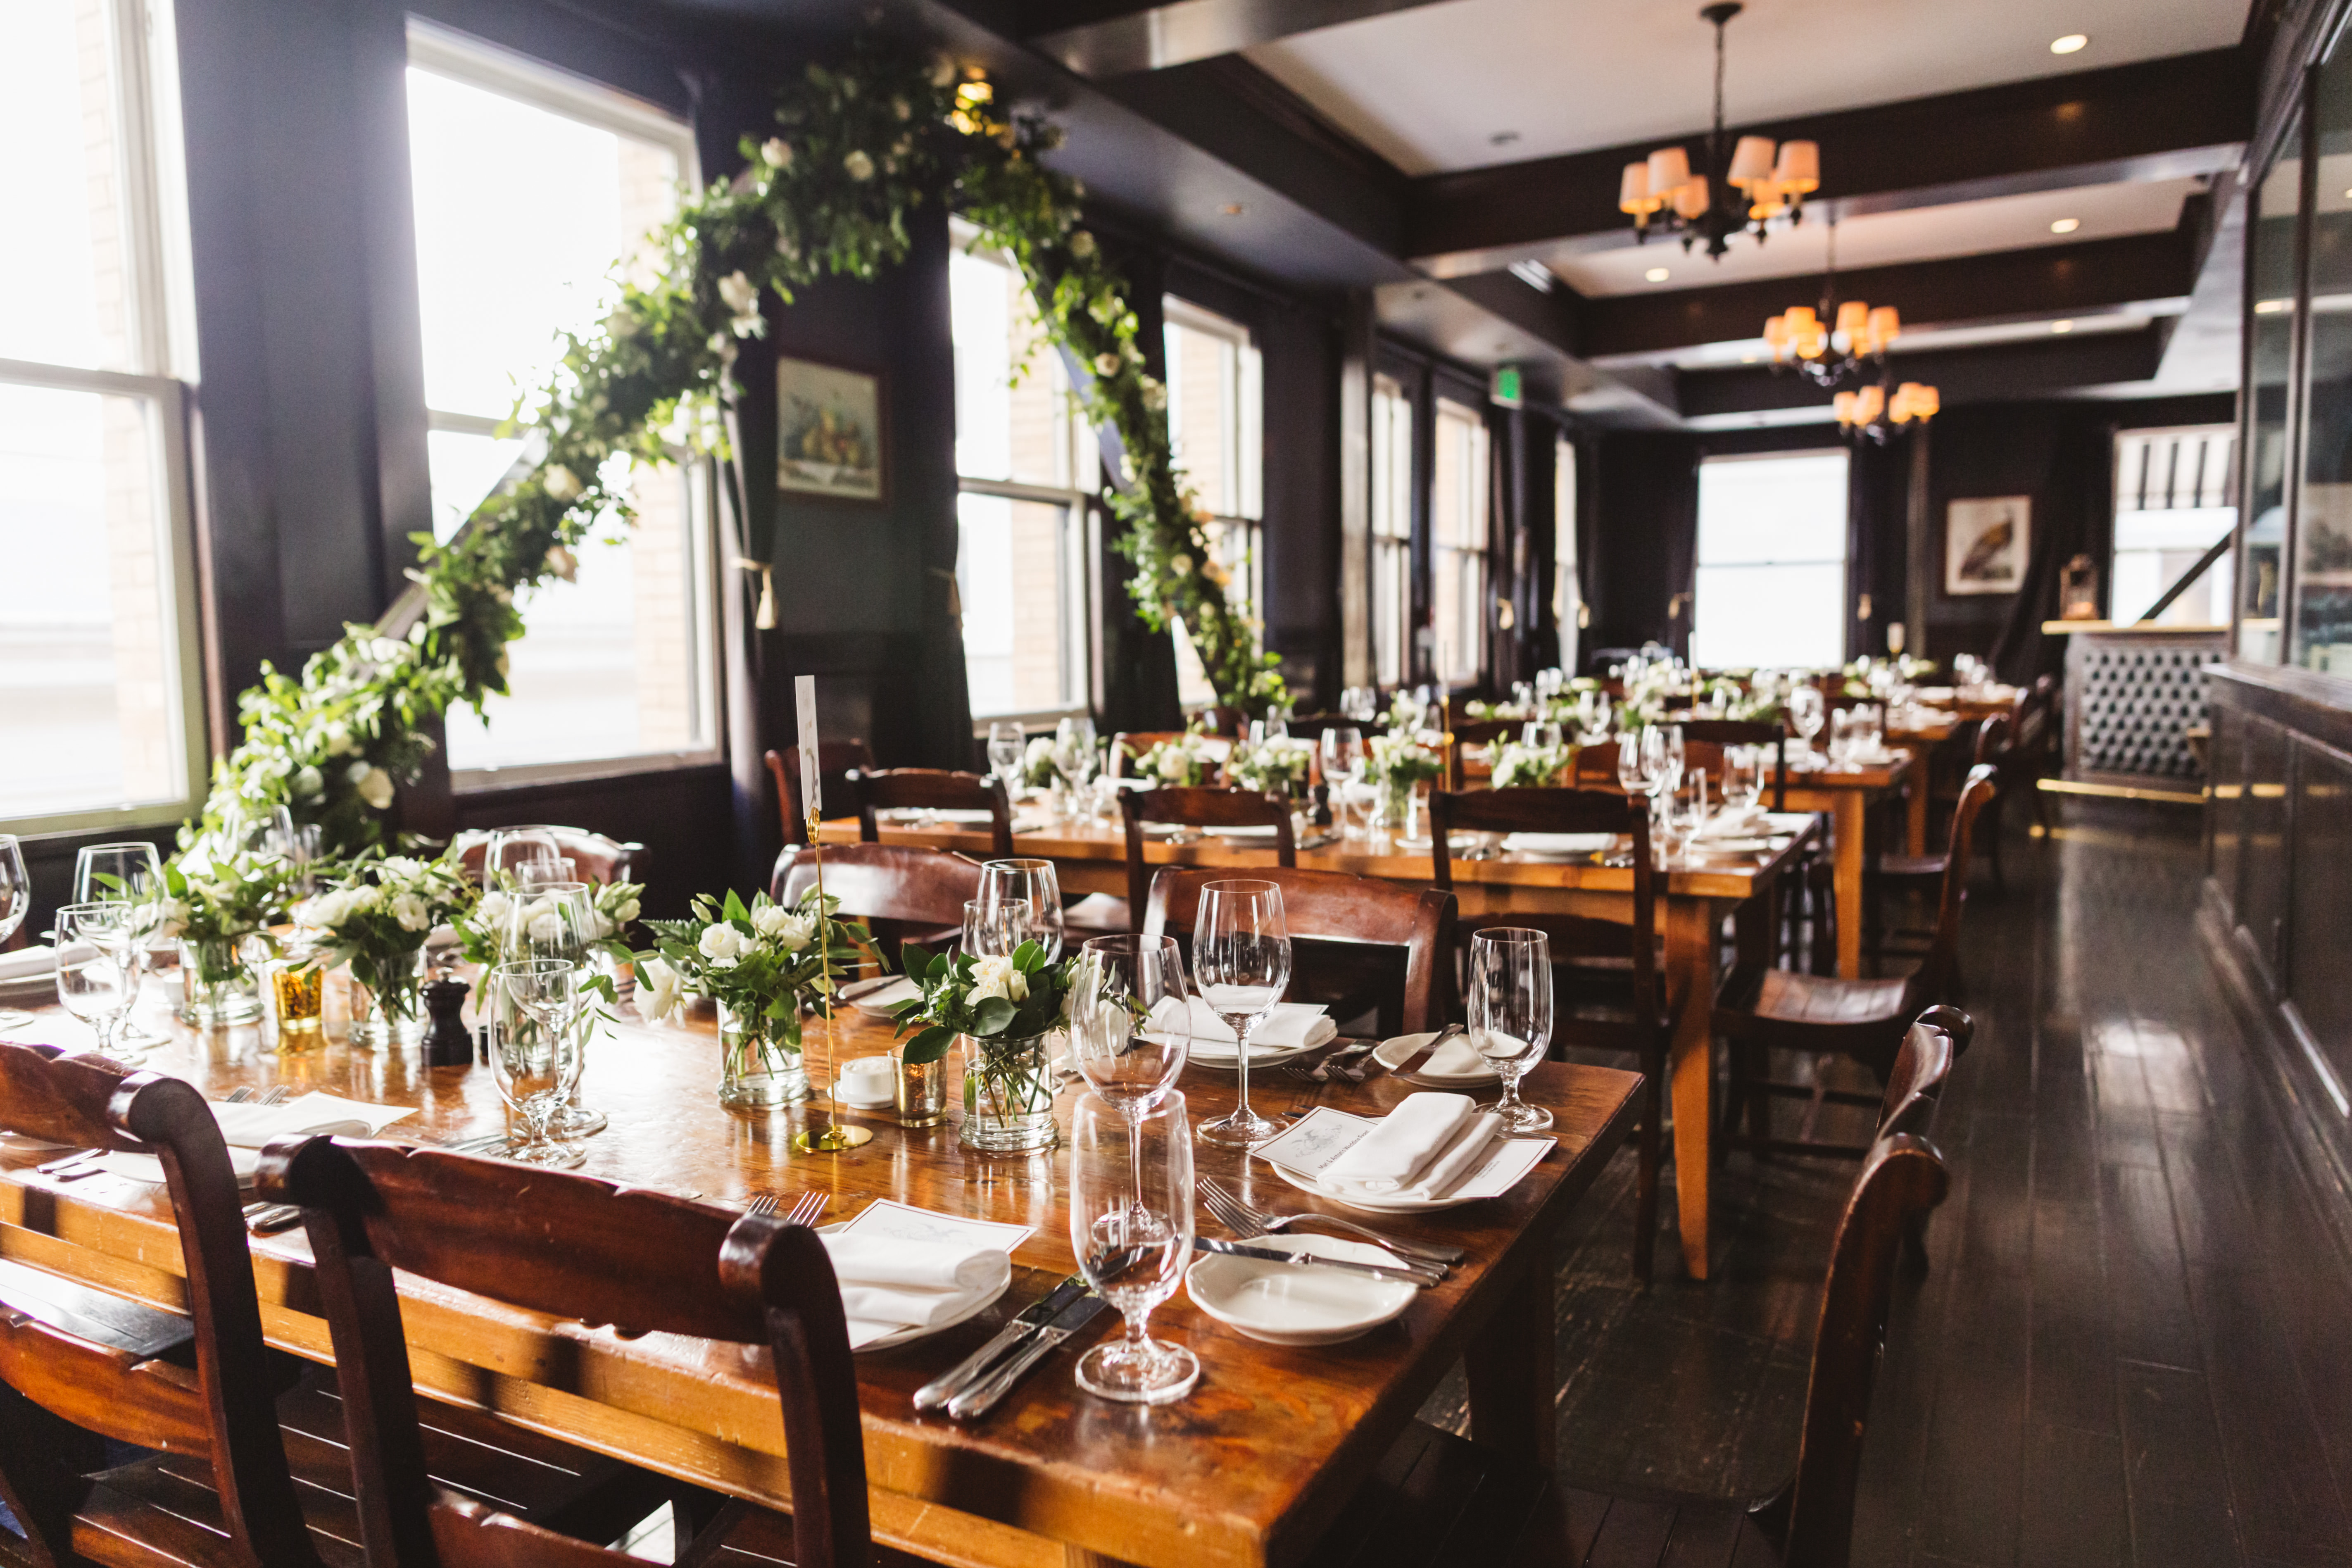 Rows of tables at Wayfare Tavern are decorated with place settings and white flowers for a wedding reception